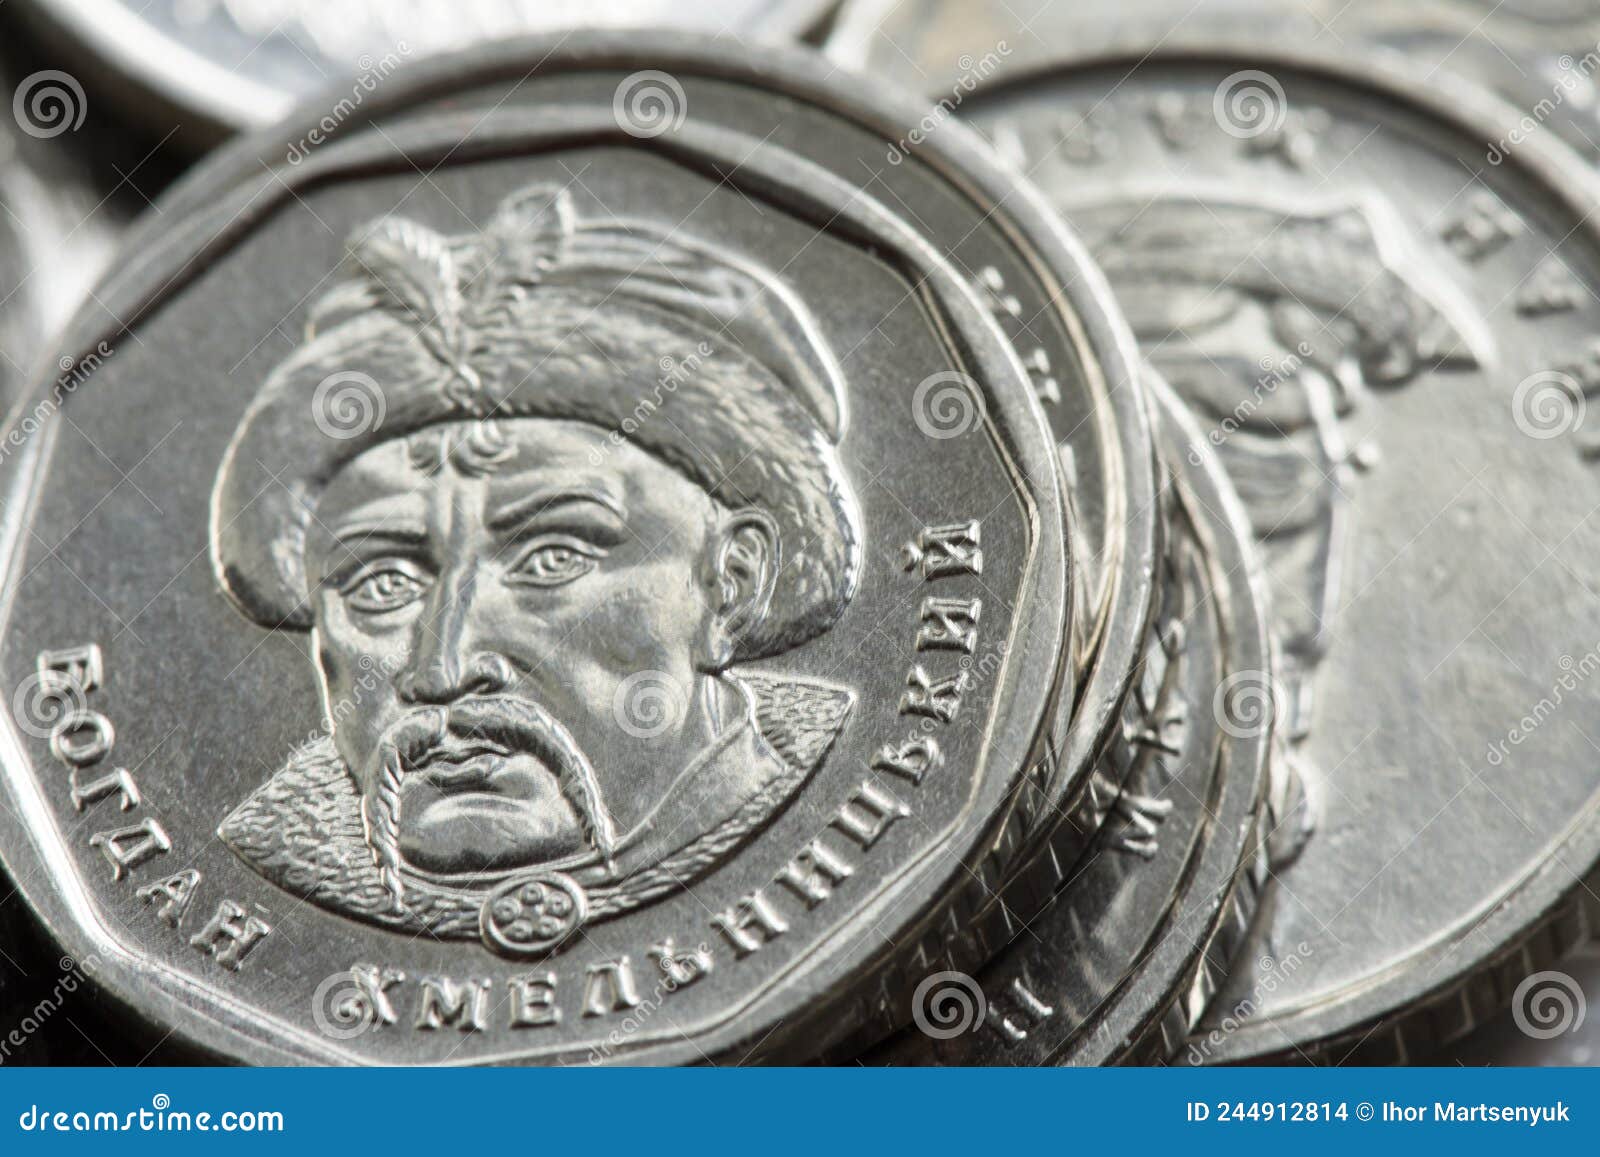 obverse of the coin of the bohdan khmelnytskyi portrait. coinage